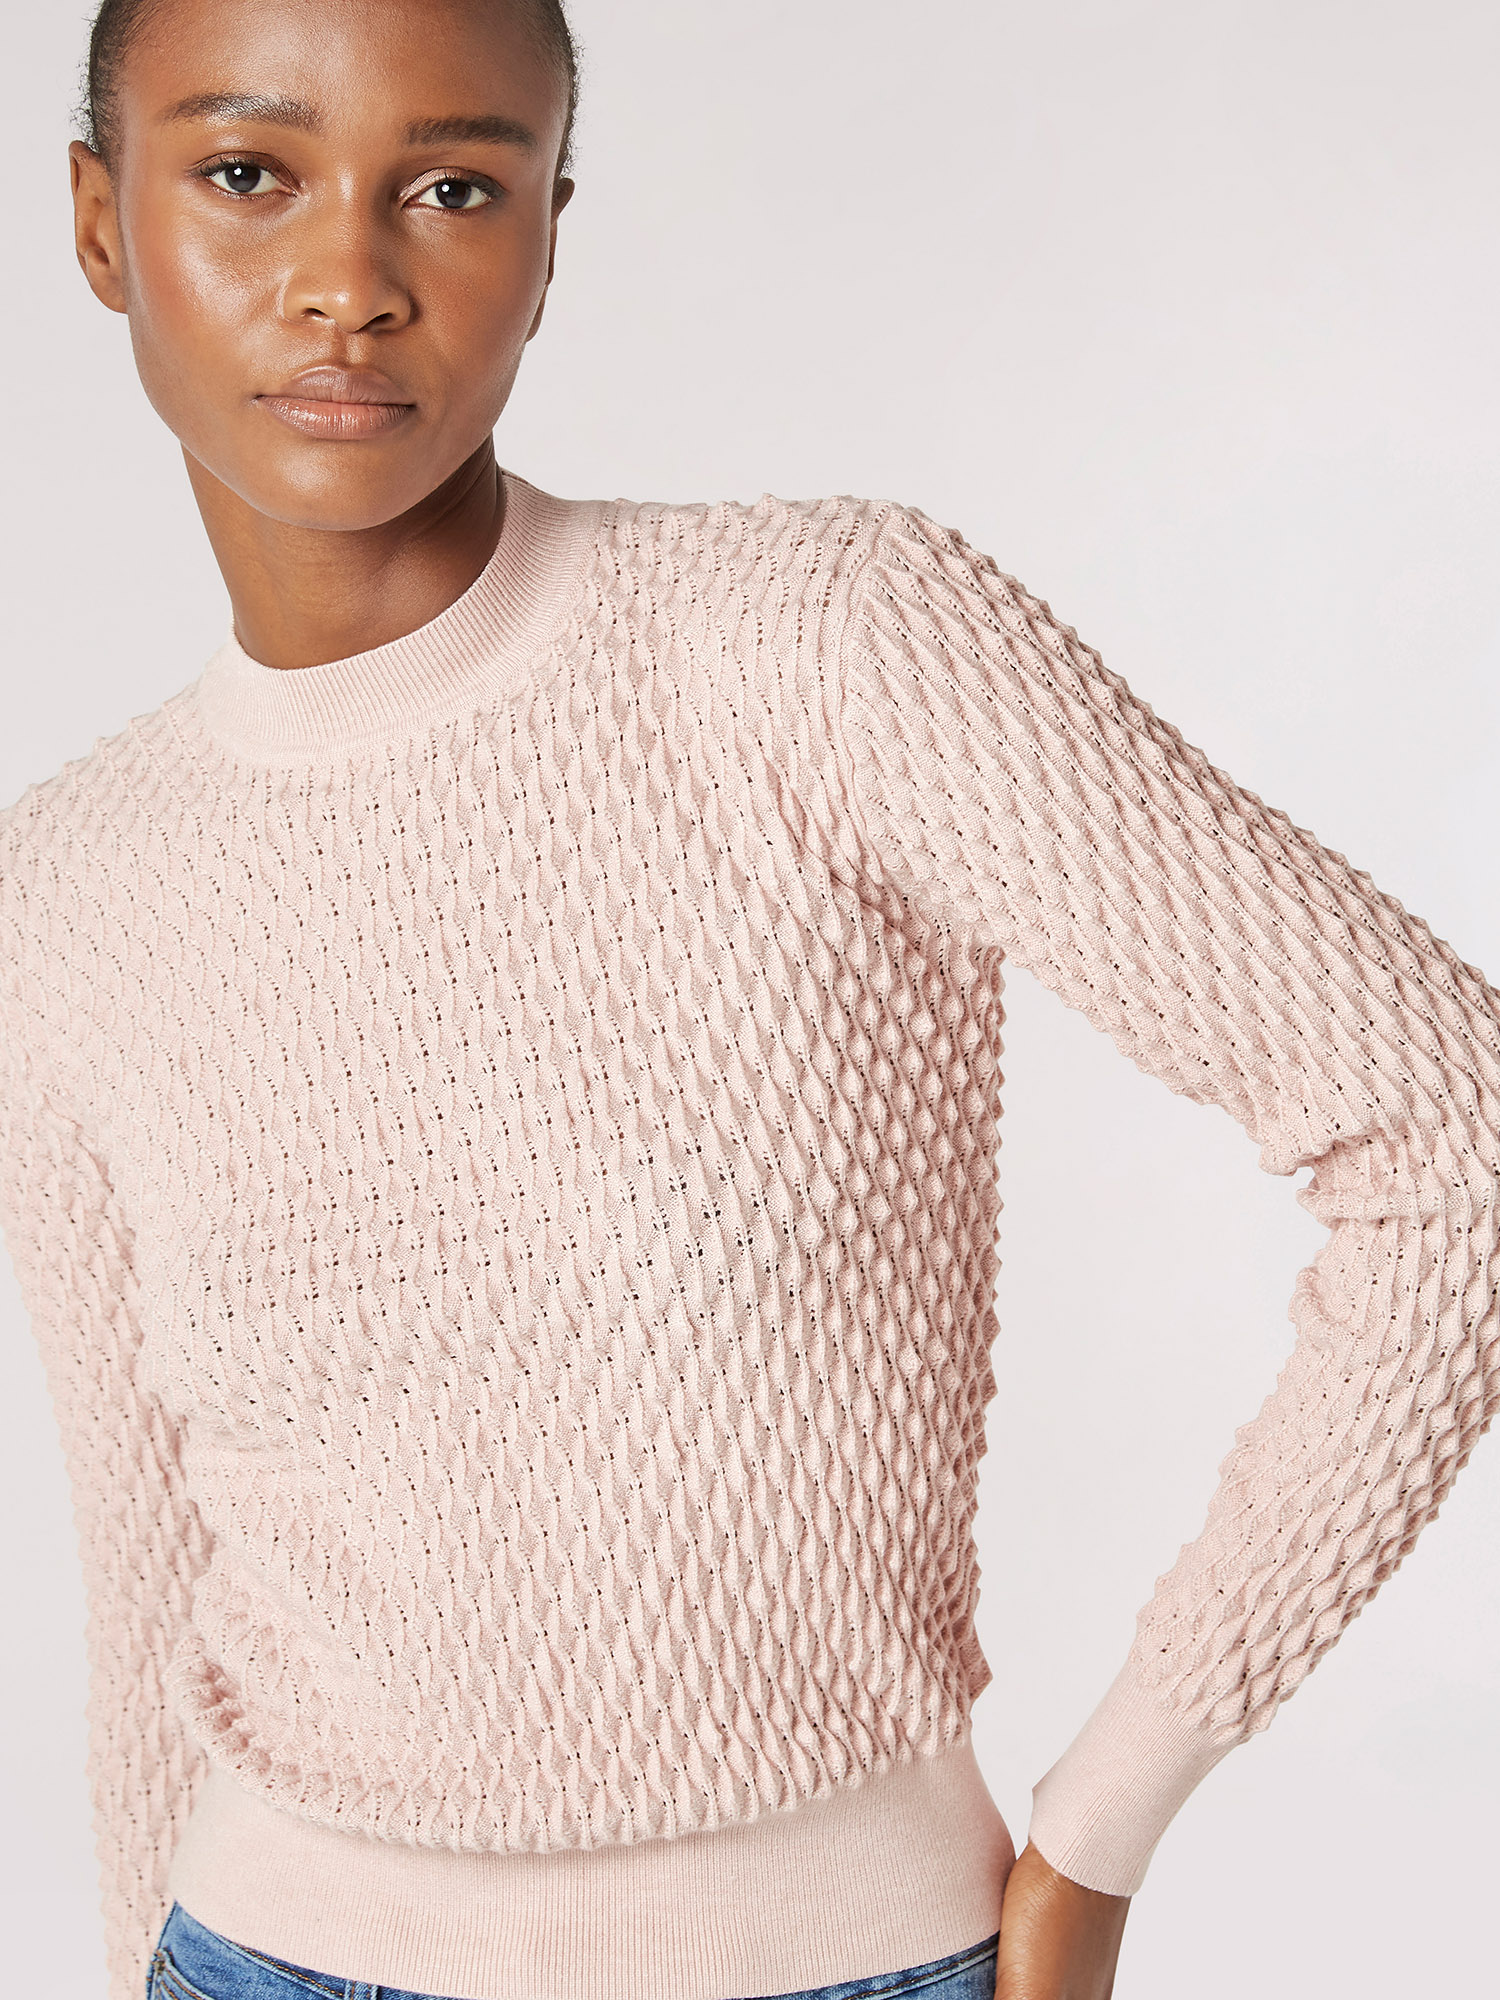 3D Textured Knitted Jumper | Apricot Clothing